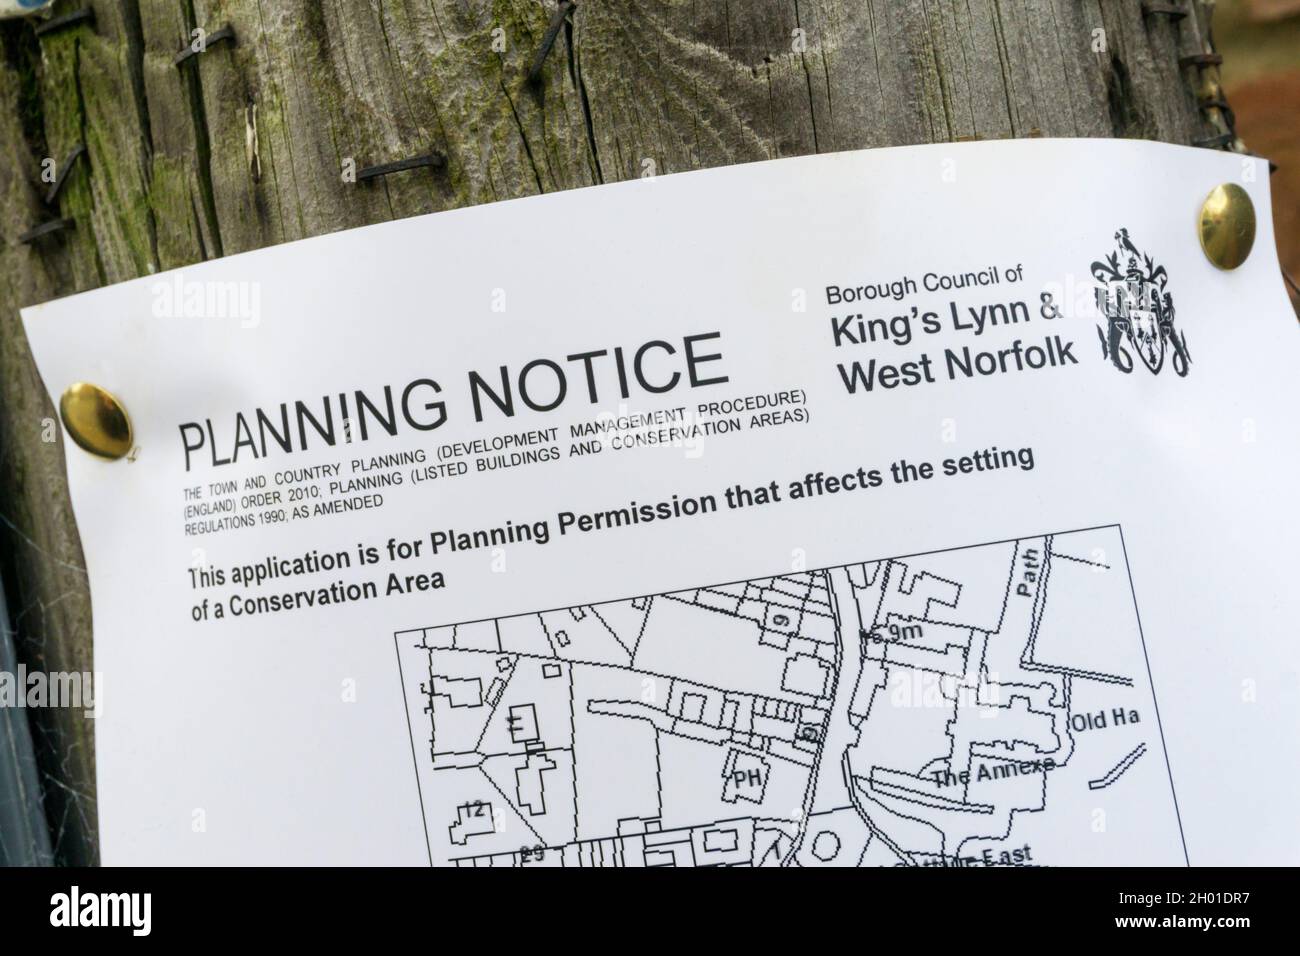 Planning Notice fixed to a building as part of application for planning permission affecting a Conservation Area. Stock Photo